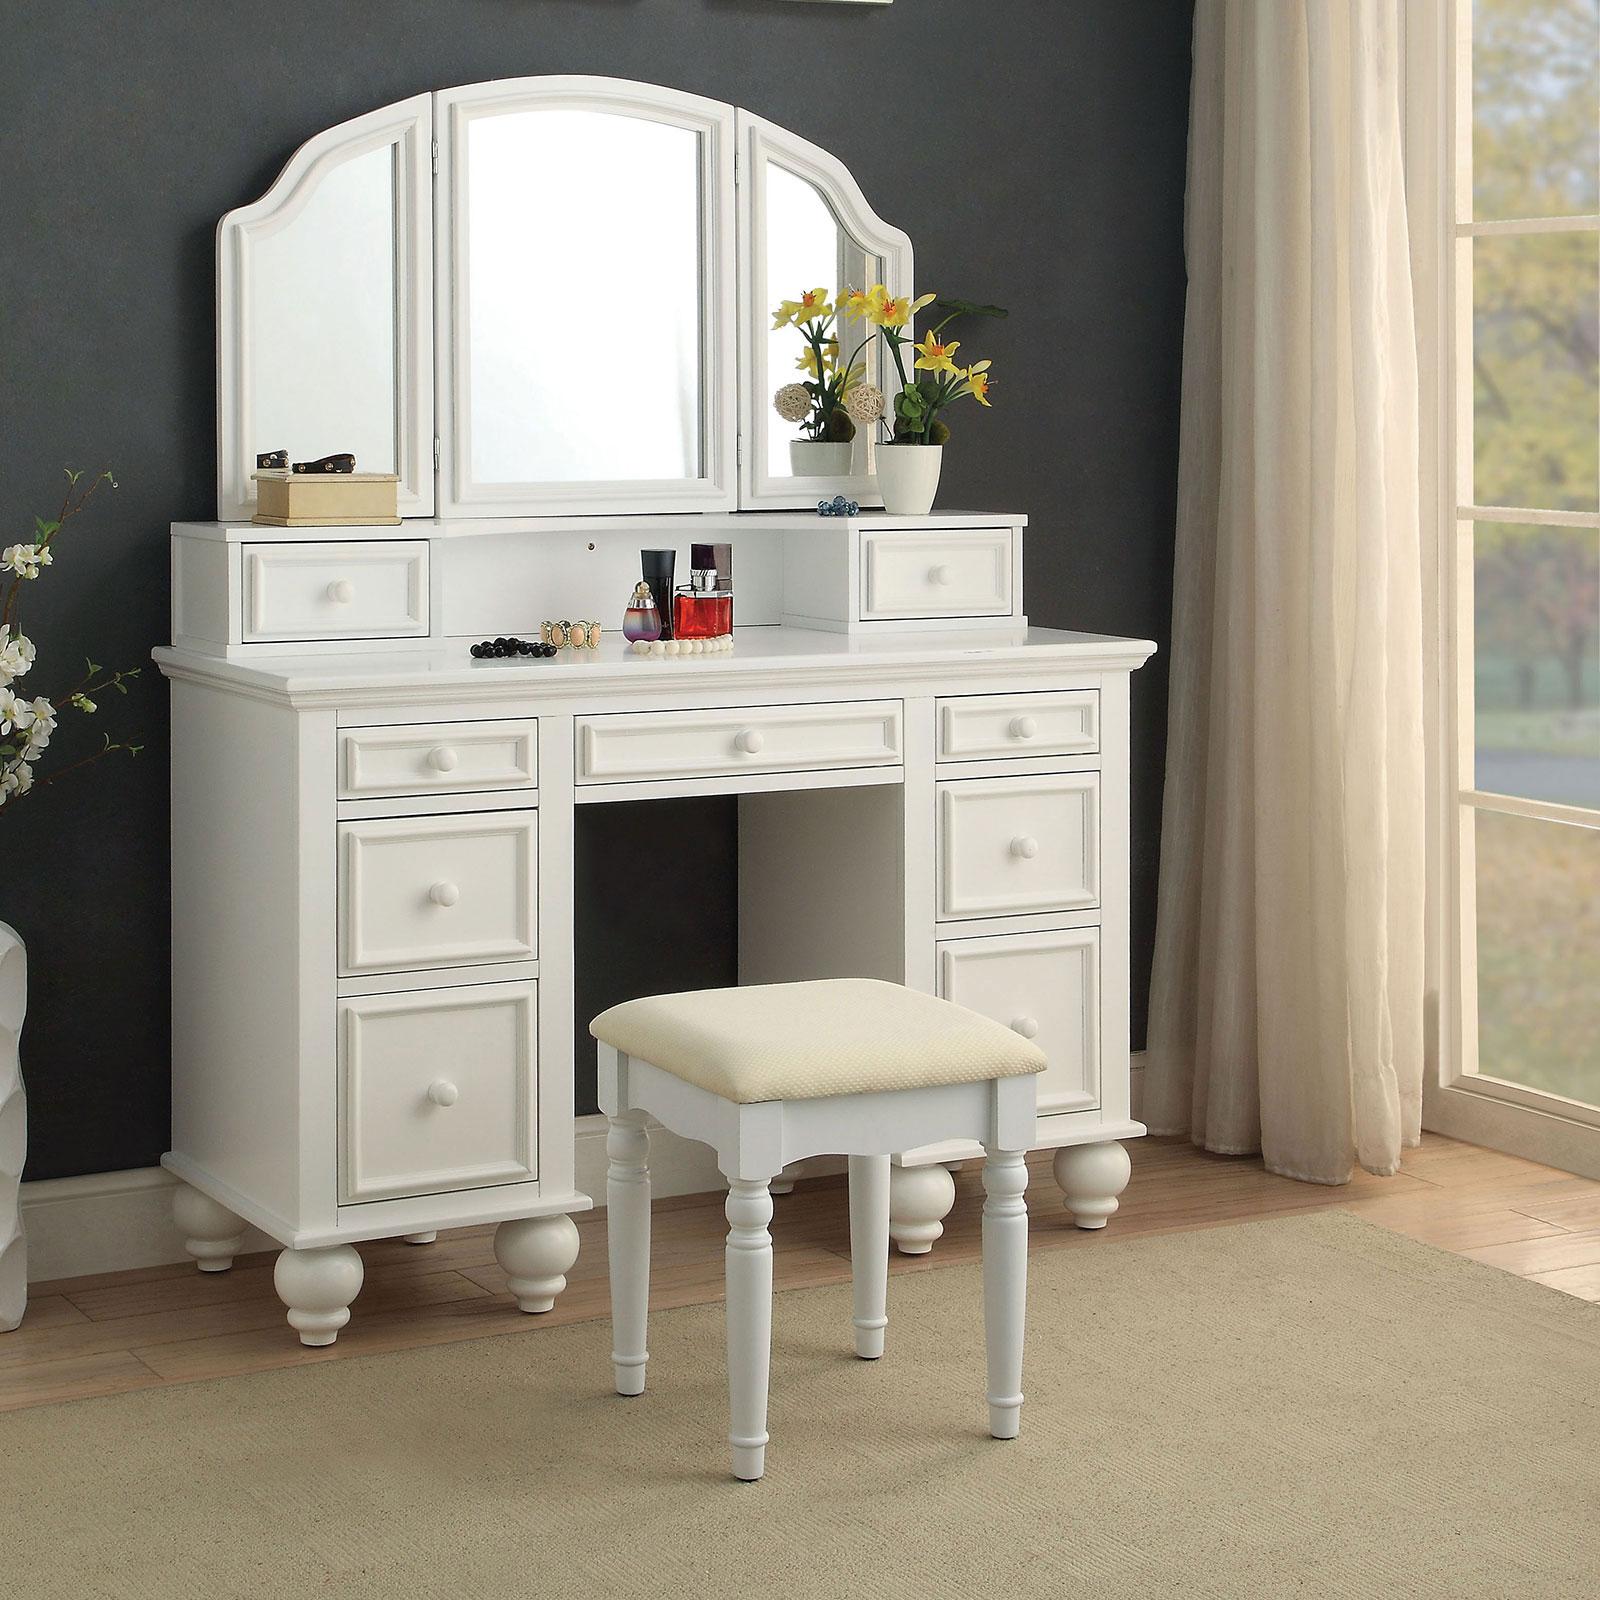 Transitional Makeup Vanity ATHY CM-DK6848WH CM-DK6848WH in White Fabric